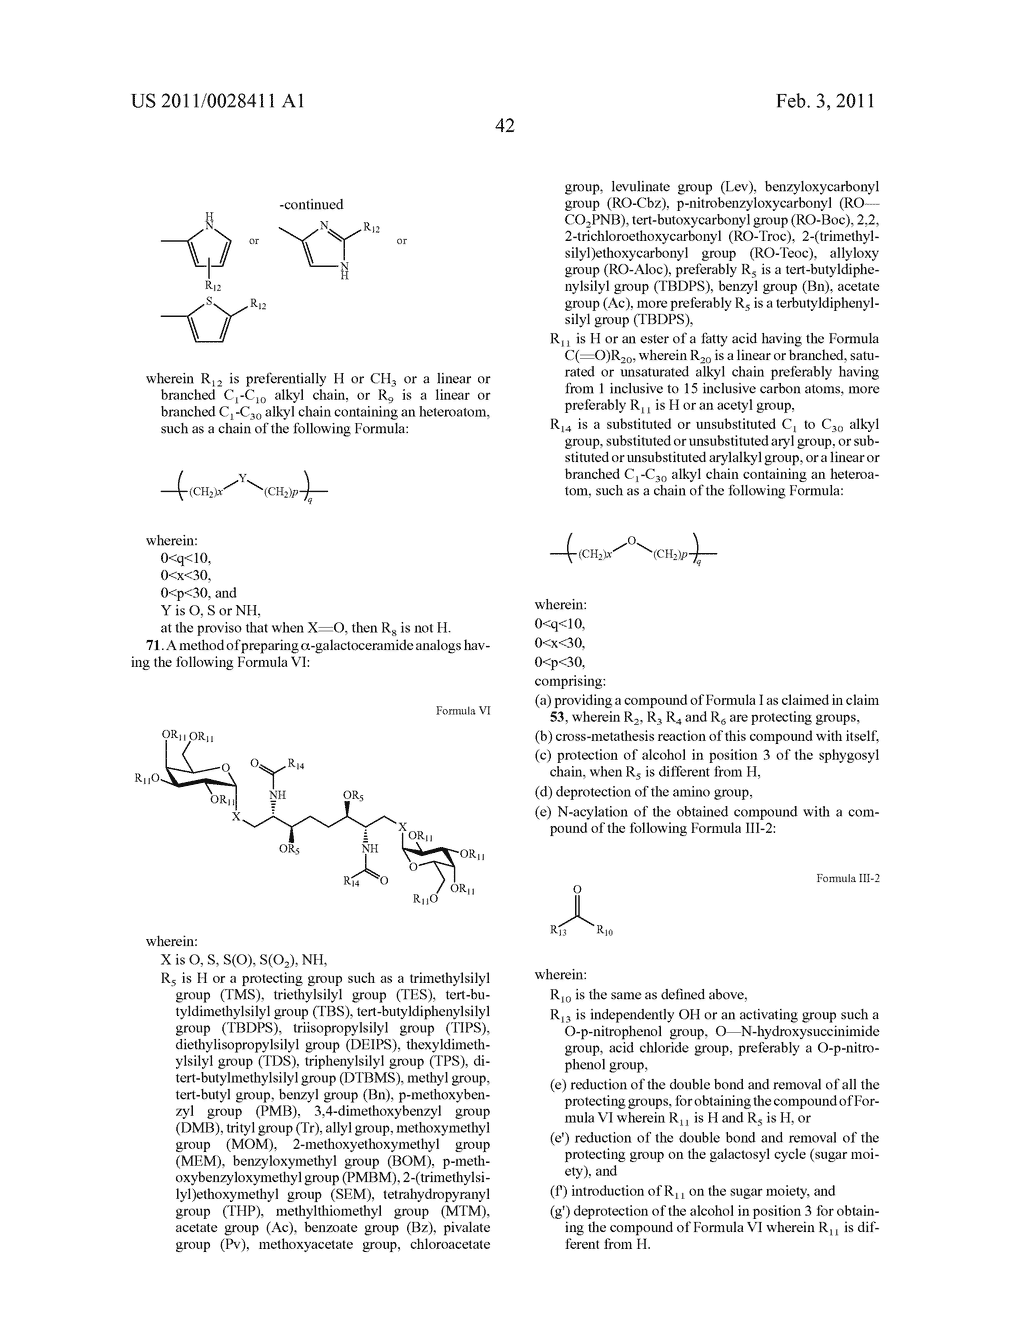 ALPHA-GALACTOCERAMIDE ANALOGS, THEIR METHODS OF MANUFACTURE, INTERMEDIATE COMPOUNDS USEFUL IN THESE METHODS, AND PHARMACEUTICAL COMPOSITIONS CONTAINING THEM - diagram, schematic, and image 49